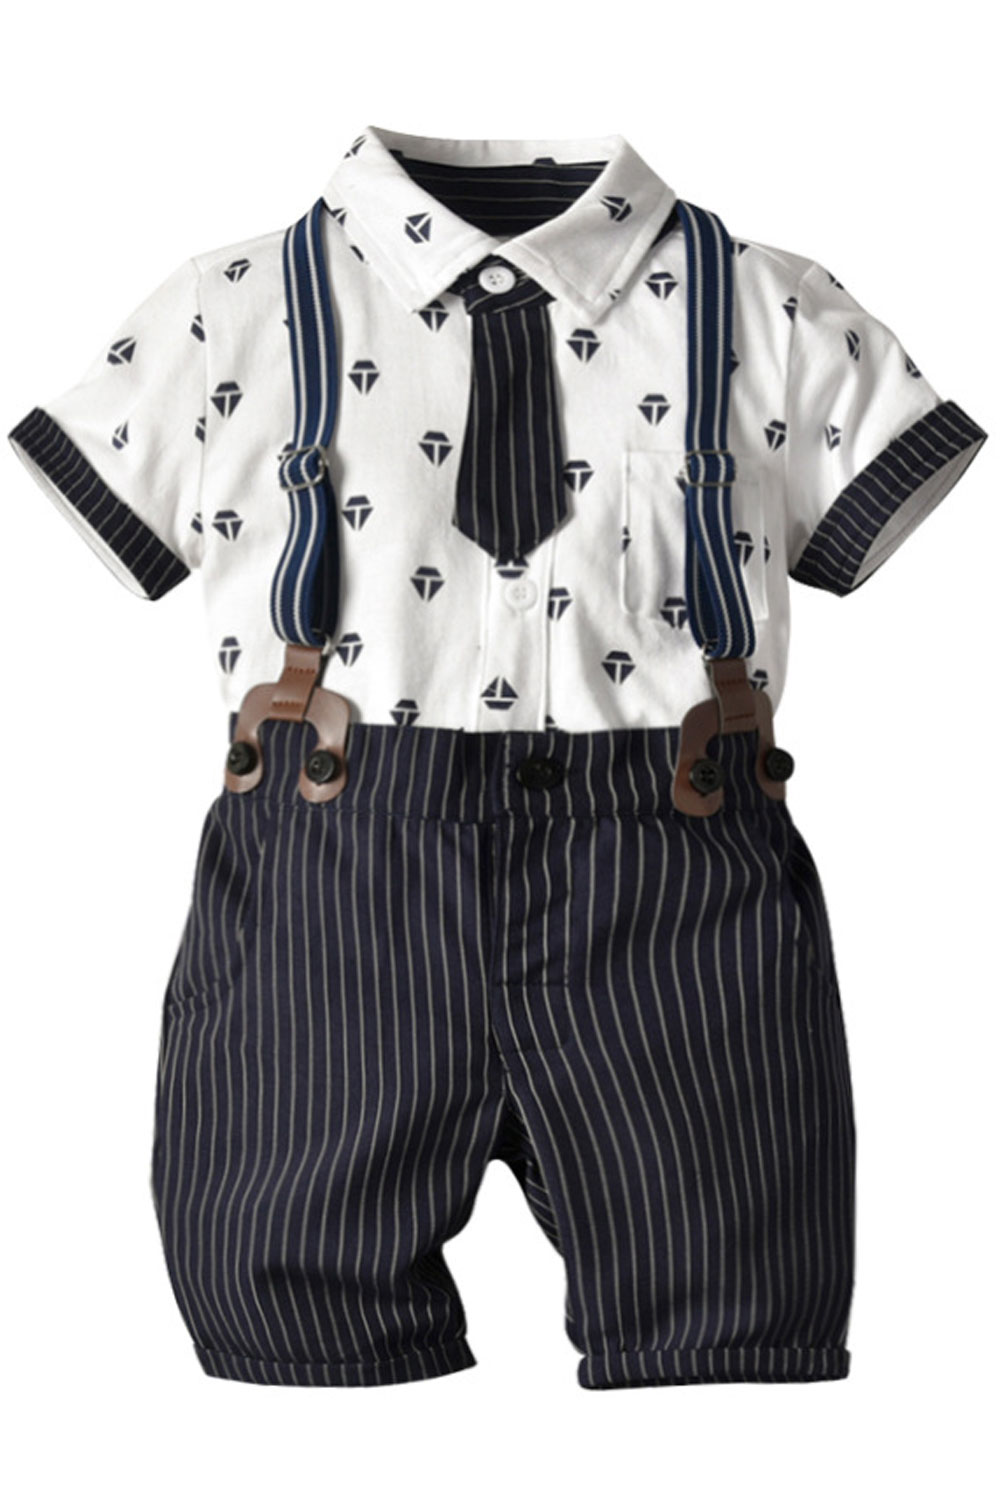 Tom Carry Toddler Boys Printed Top Striped Bottom Two Piece OUtfit Set